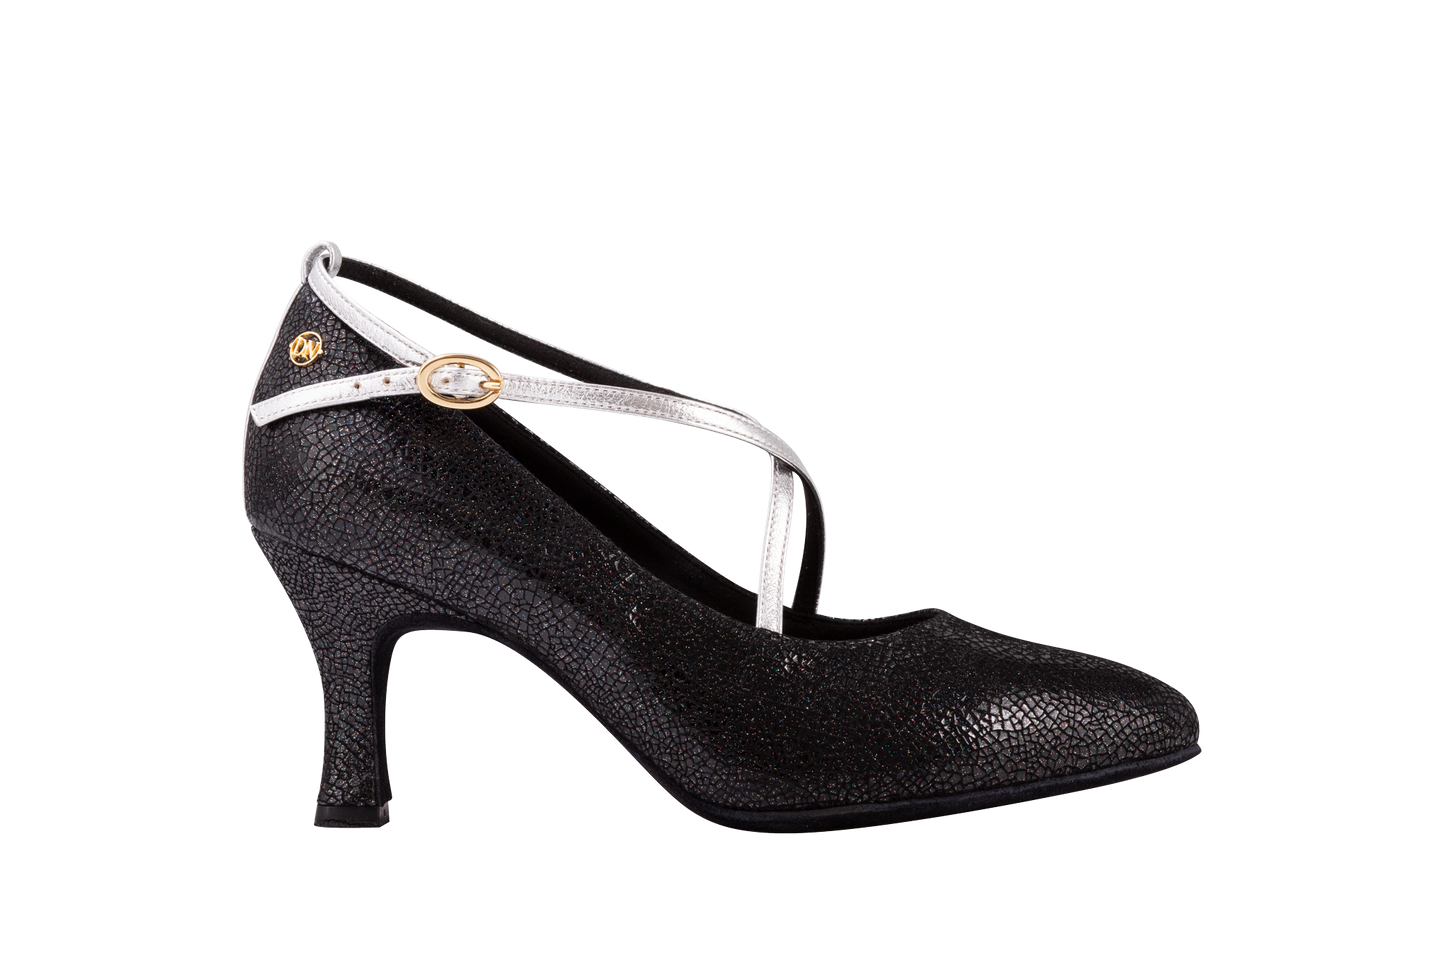 Dance Naturals 96 Isabella Glitter Black Printed Ballroom Dance Shoe with Crossed Silver Leather Straps and Pointed Toe